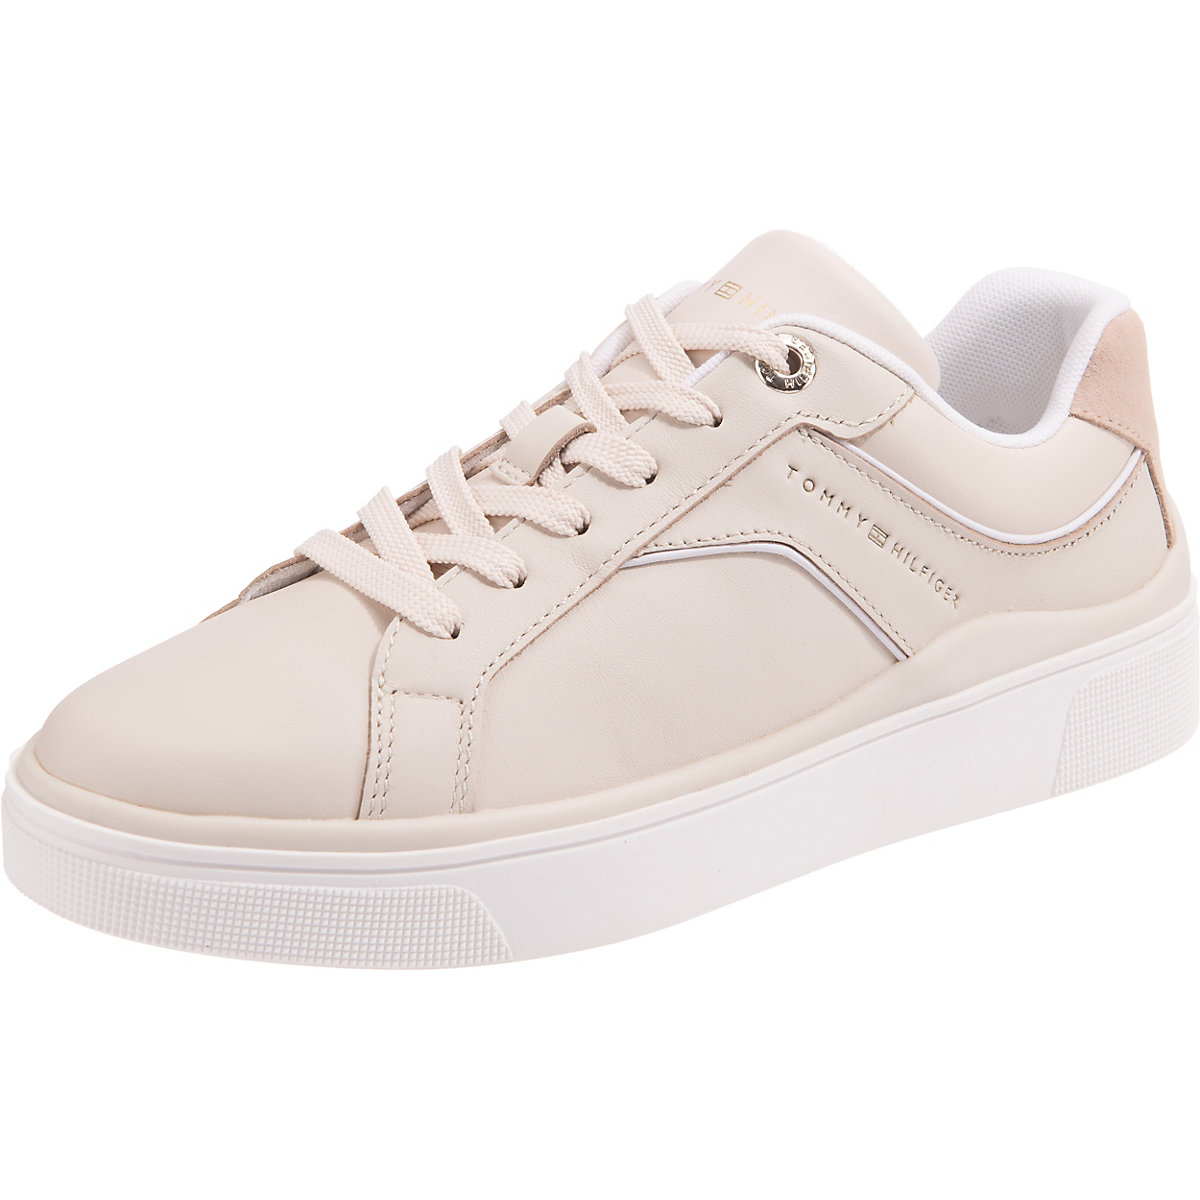 TOMMY HILFIGER Sneakers Low weiß Modell 1